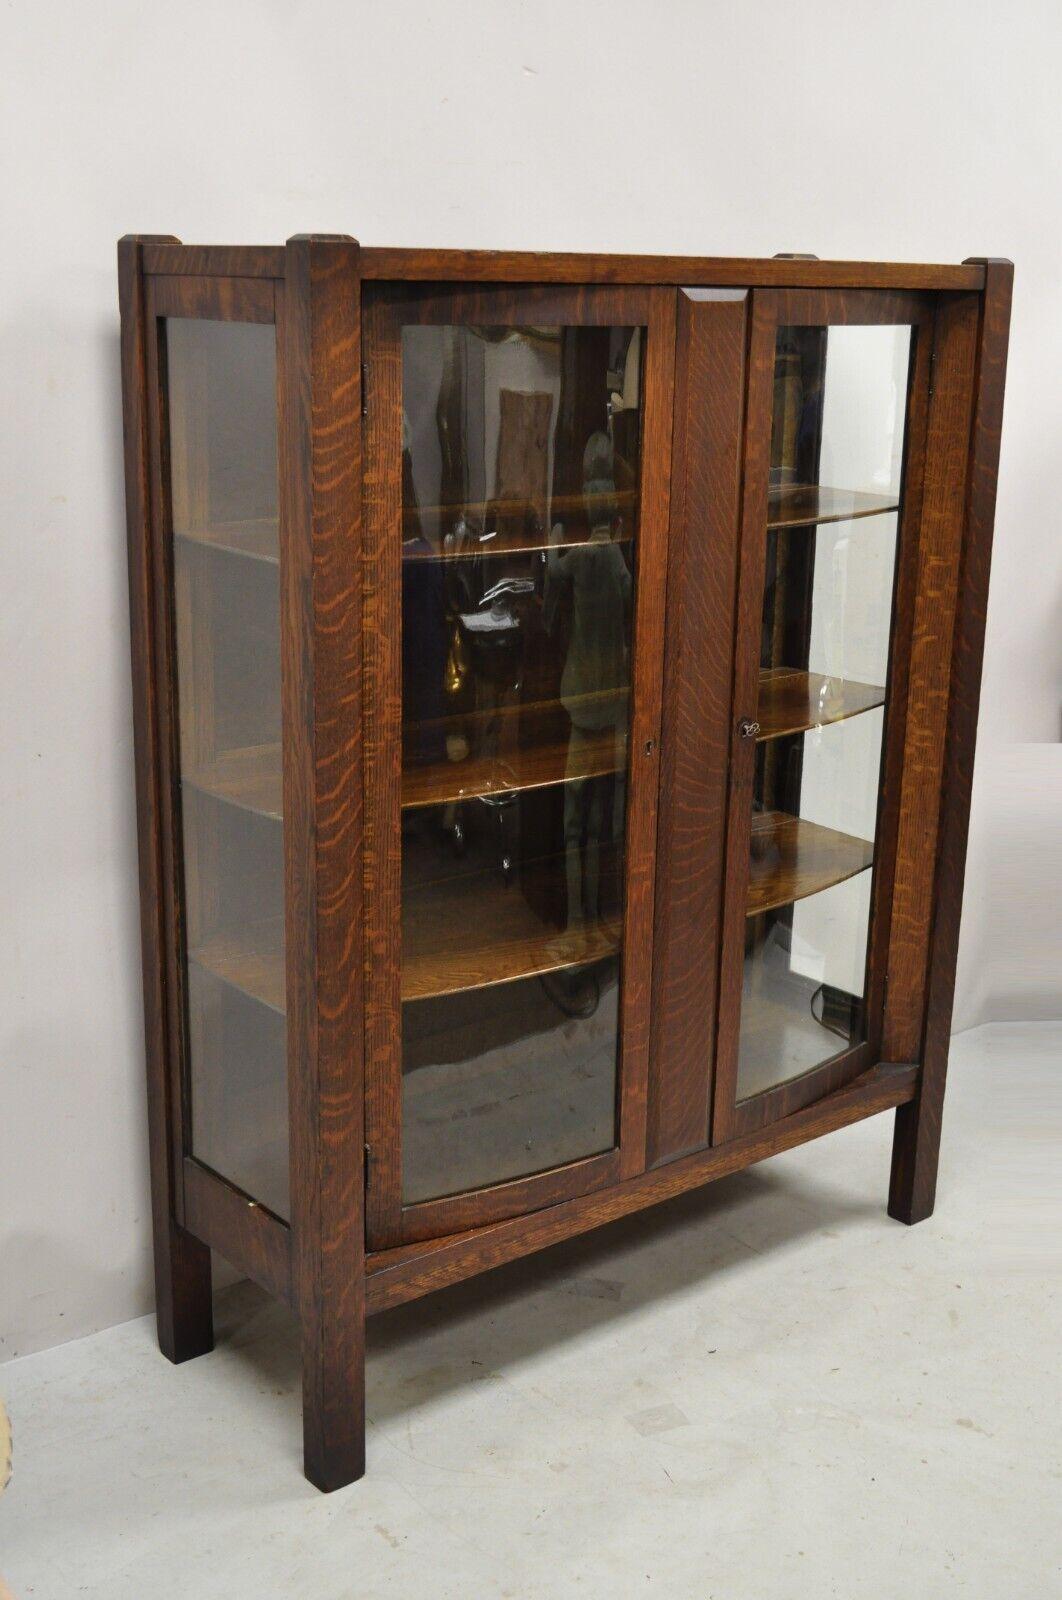 Antique mission oak arts & crafts stickley era 2 door China cabinet. Item features a beautiful wood grain, 2 curved swing doors, working lock and key, 3 wooden shelves, very nice antique item, quality American craftsmanship. Circa early 1900s.